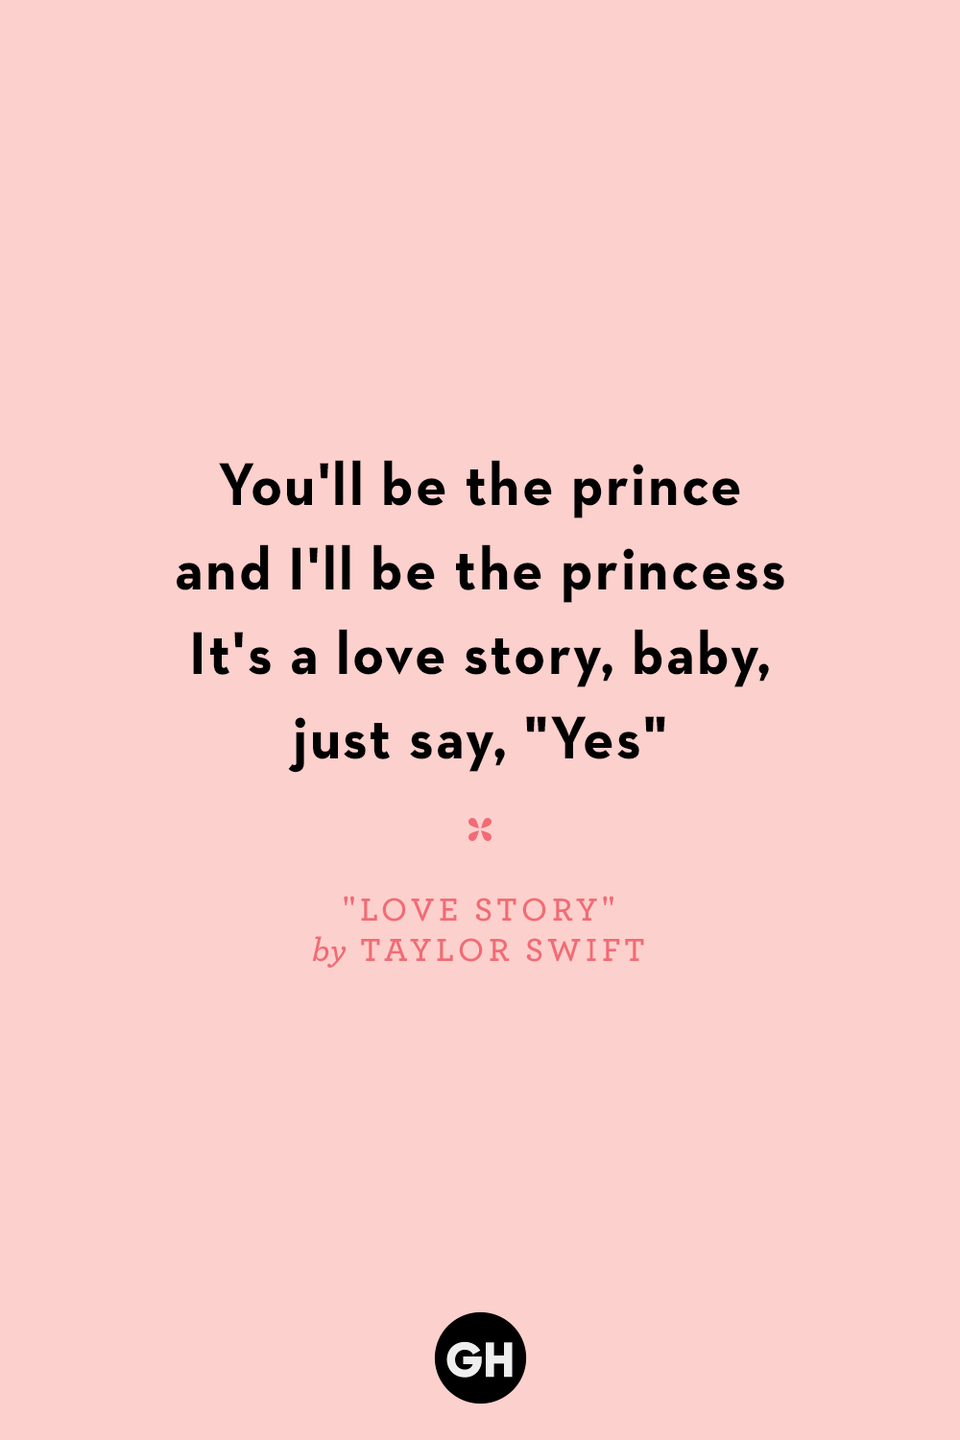 <p>You'll be the prince and I'll be the princess</p><p>It's a love story, baby, just say, "Yes"</p>